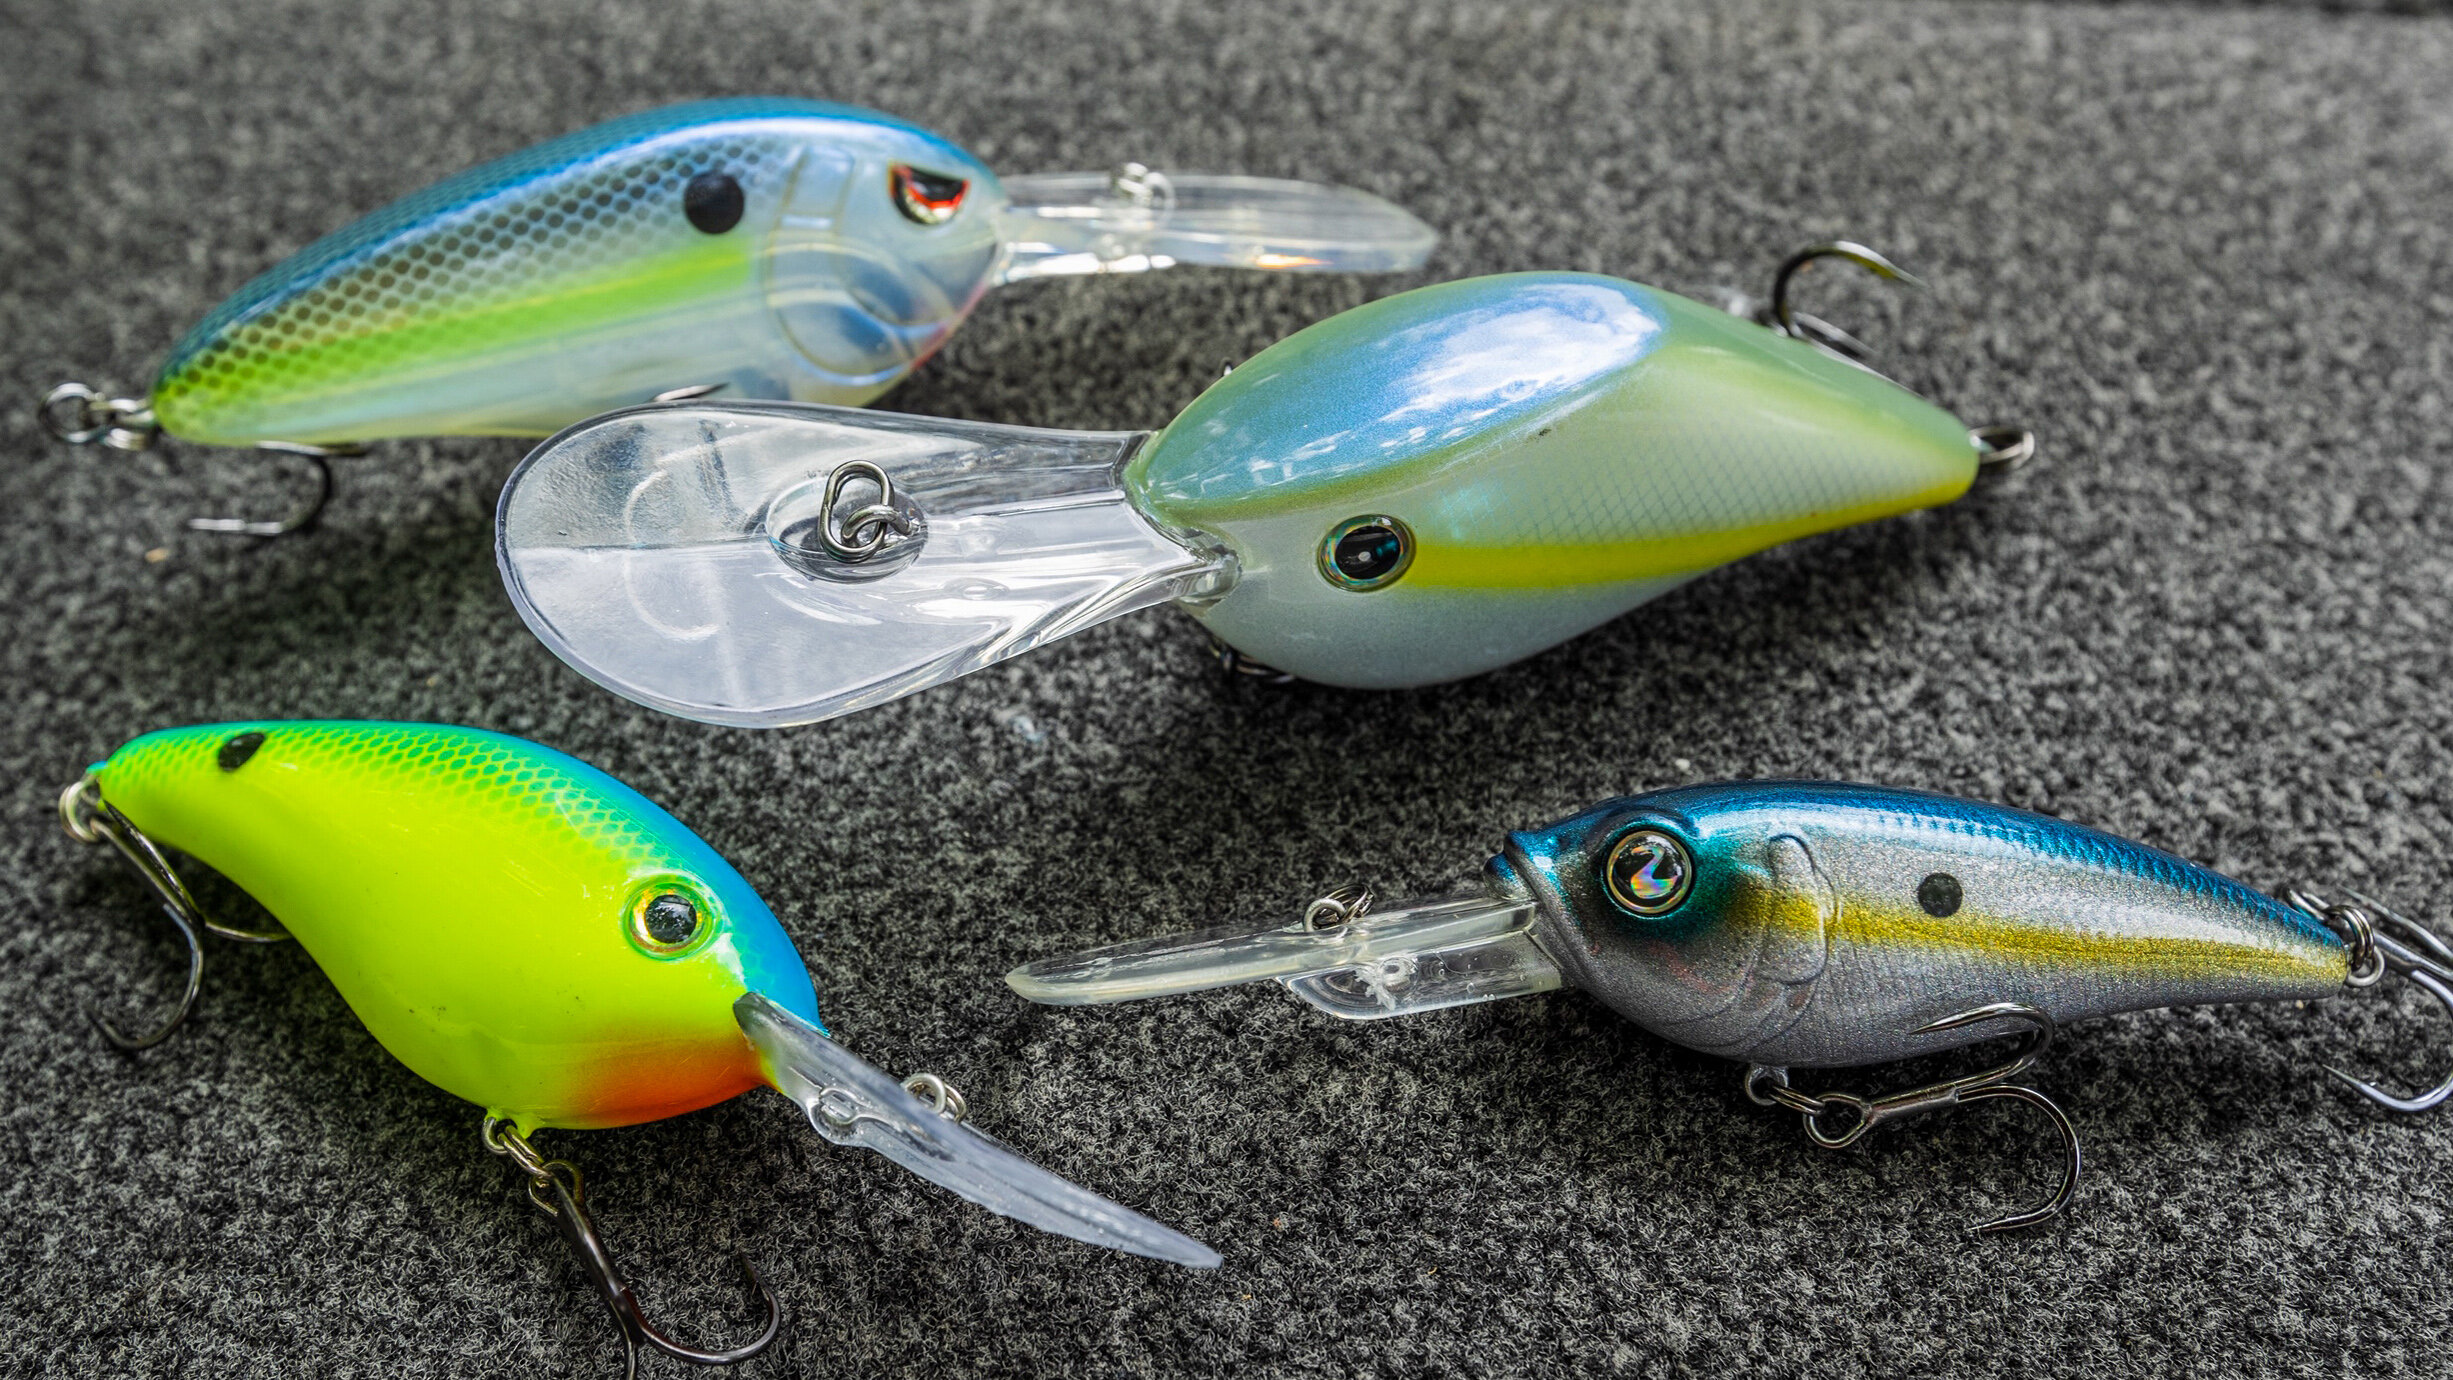 Summer Crankbait Fishing: Best Baits, Modifications, and Colors